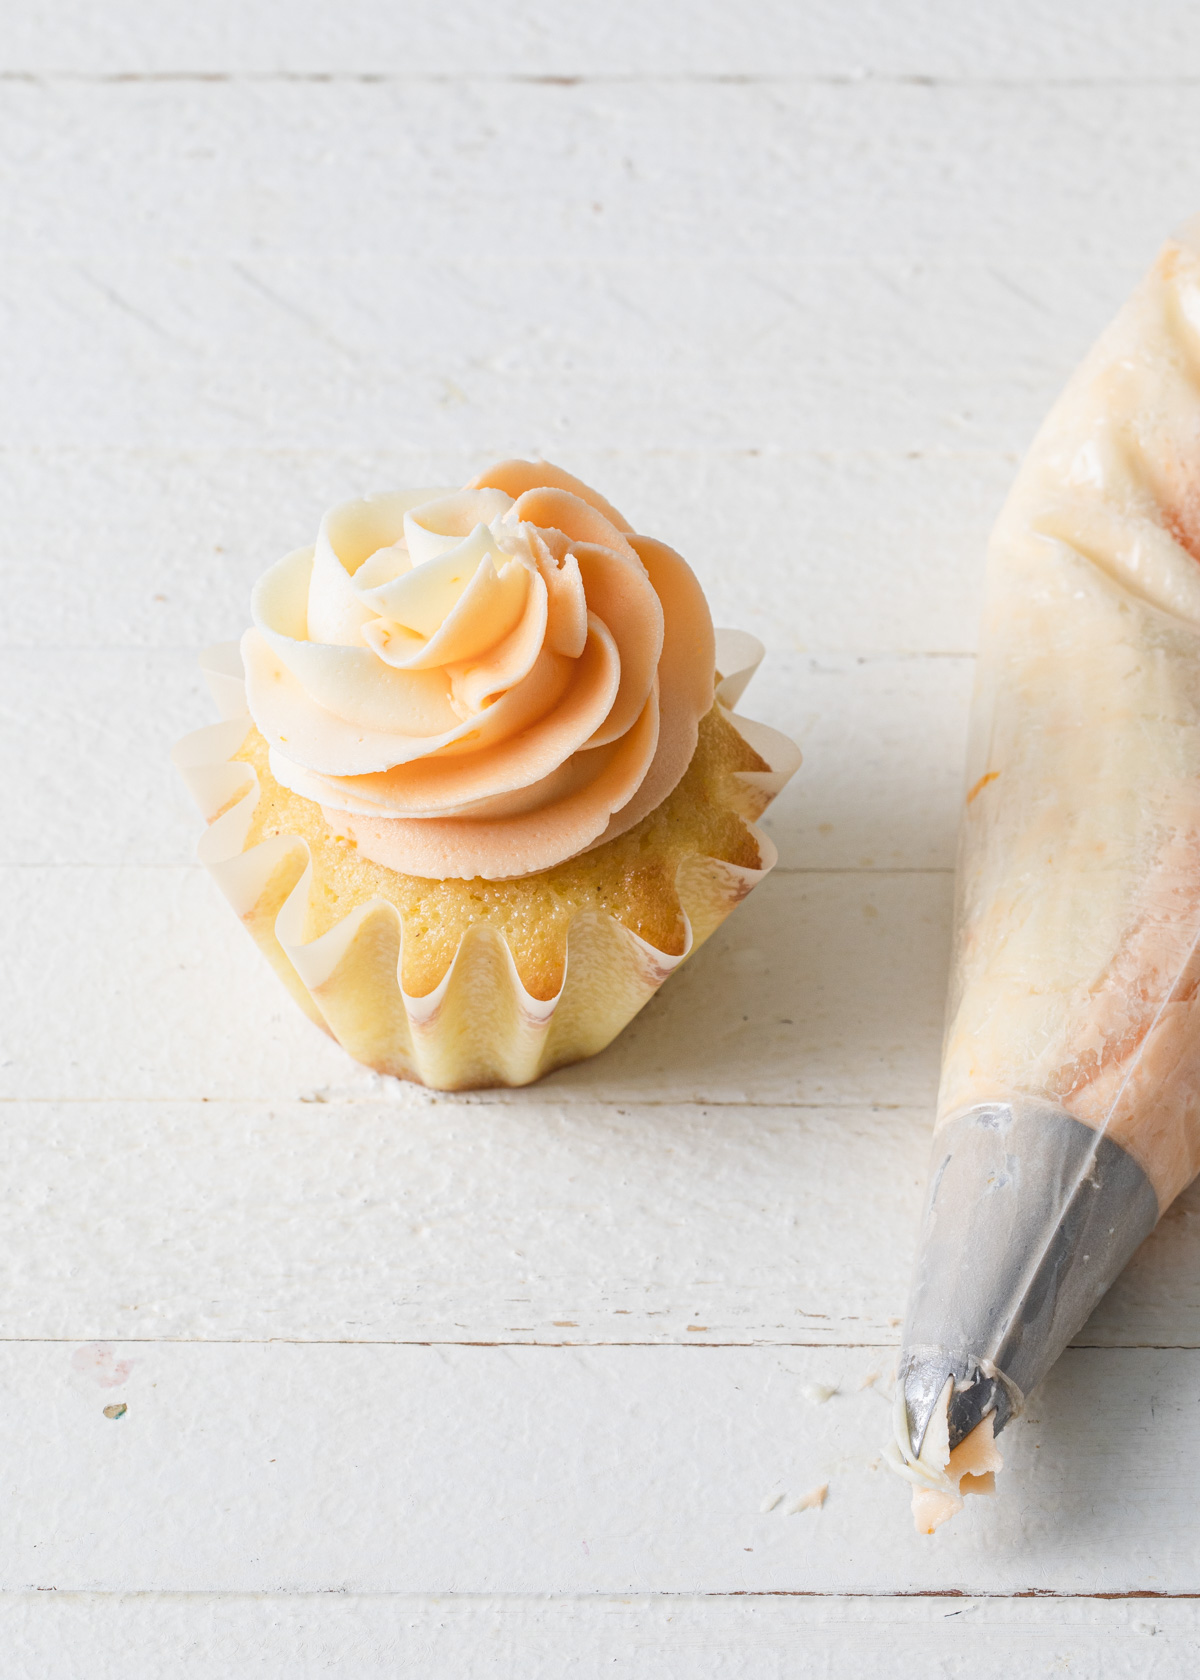 A cupcake with two-tone orange and white buttercream swirled on top